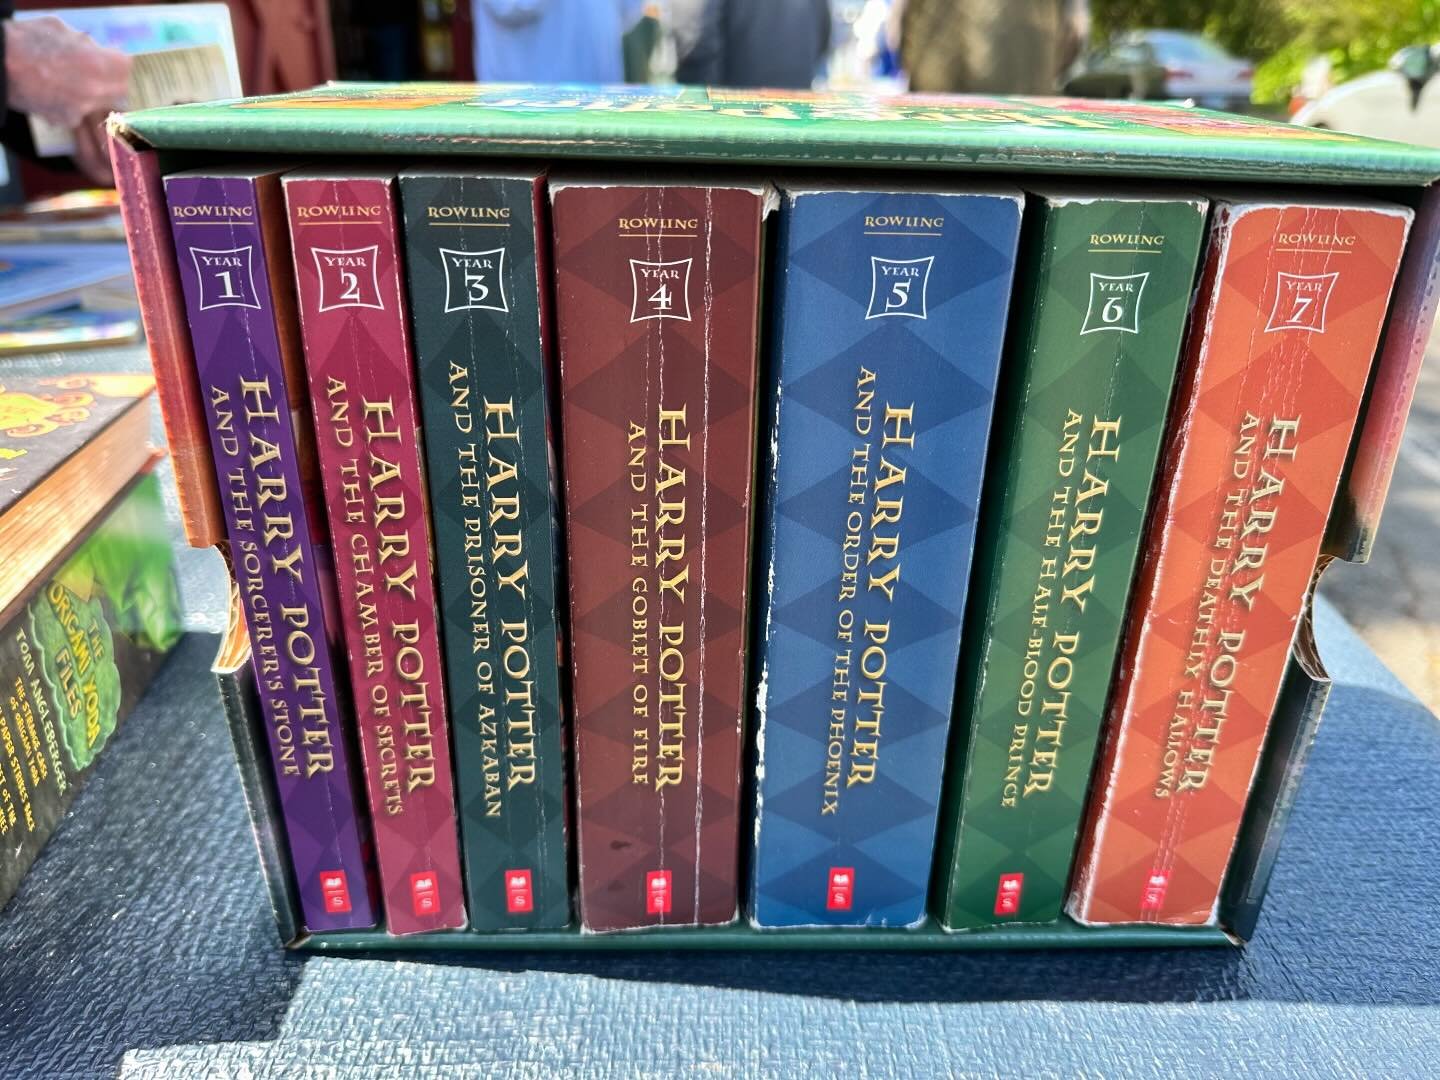 Another complete Harry Potter set ready to find a new home! #recycle #books #books4everyonect #keepbooksoutoflandfills